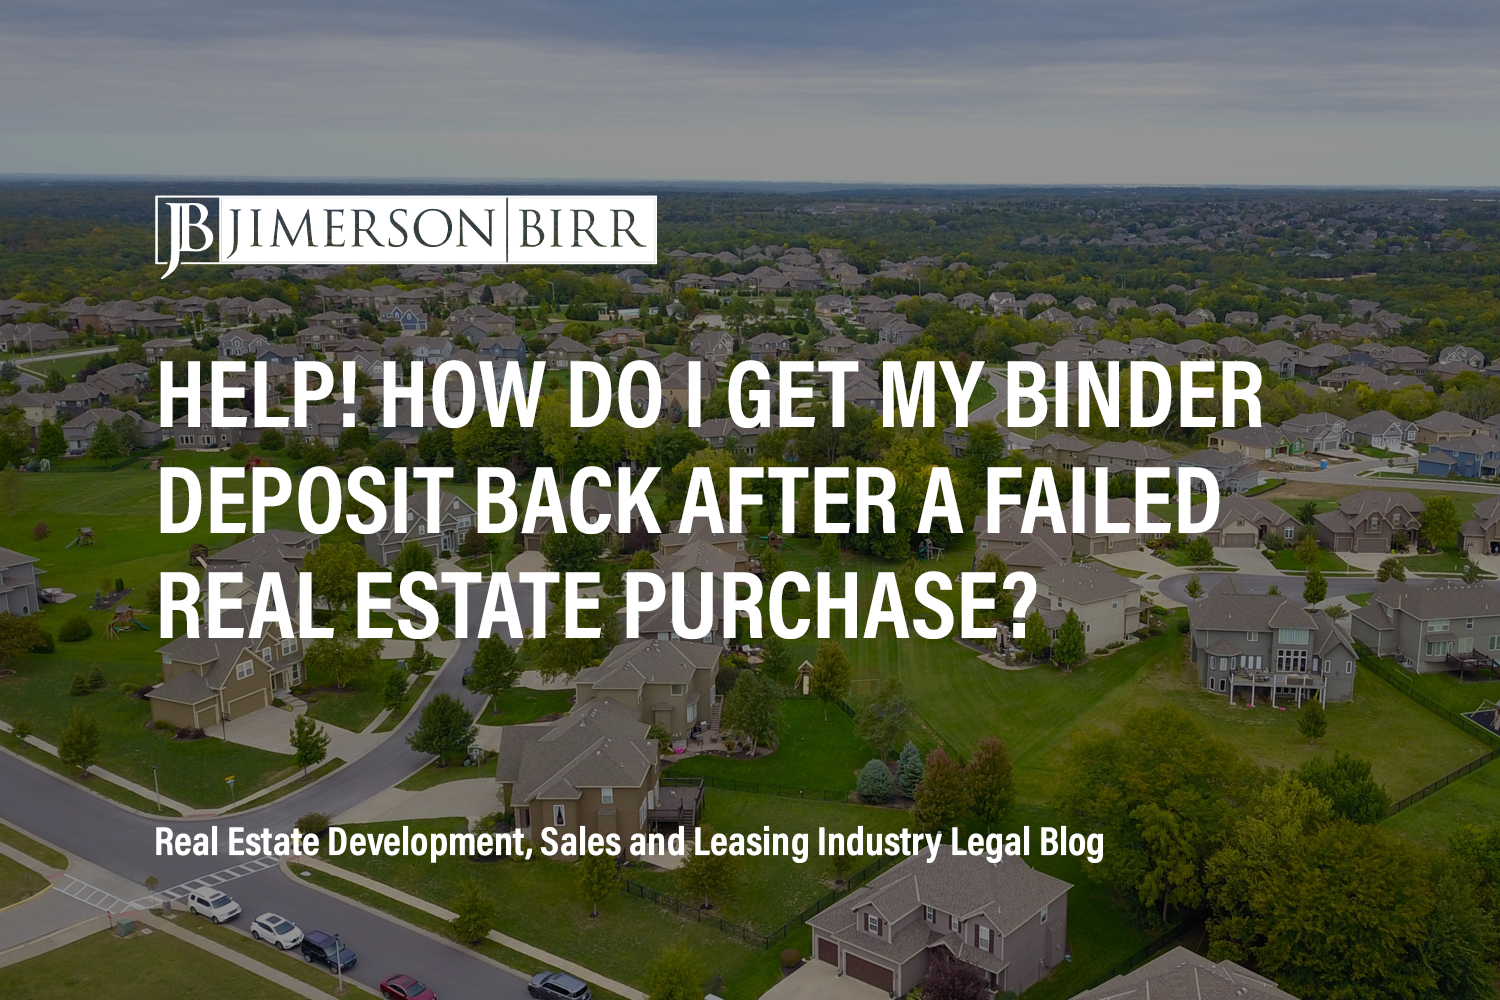 Help! How do I get my binder deposit back after a failed real estate purchase?